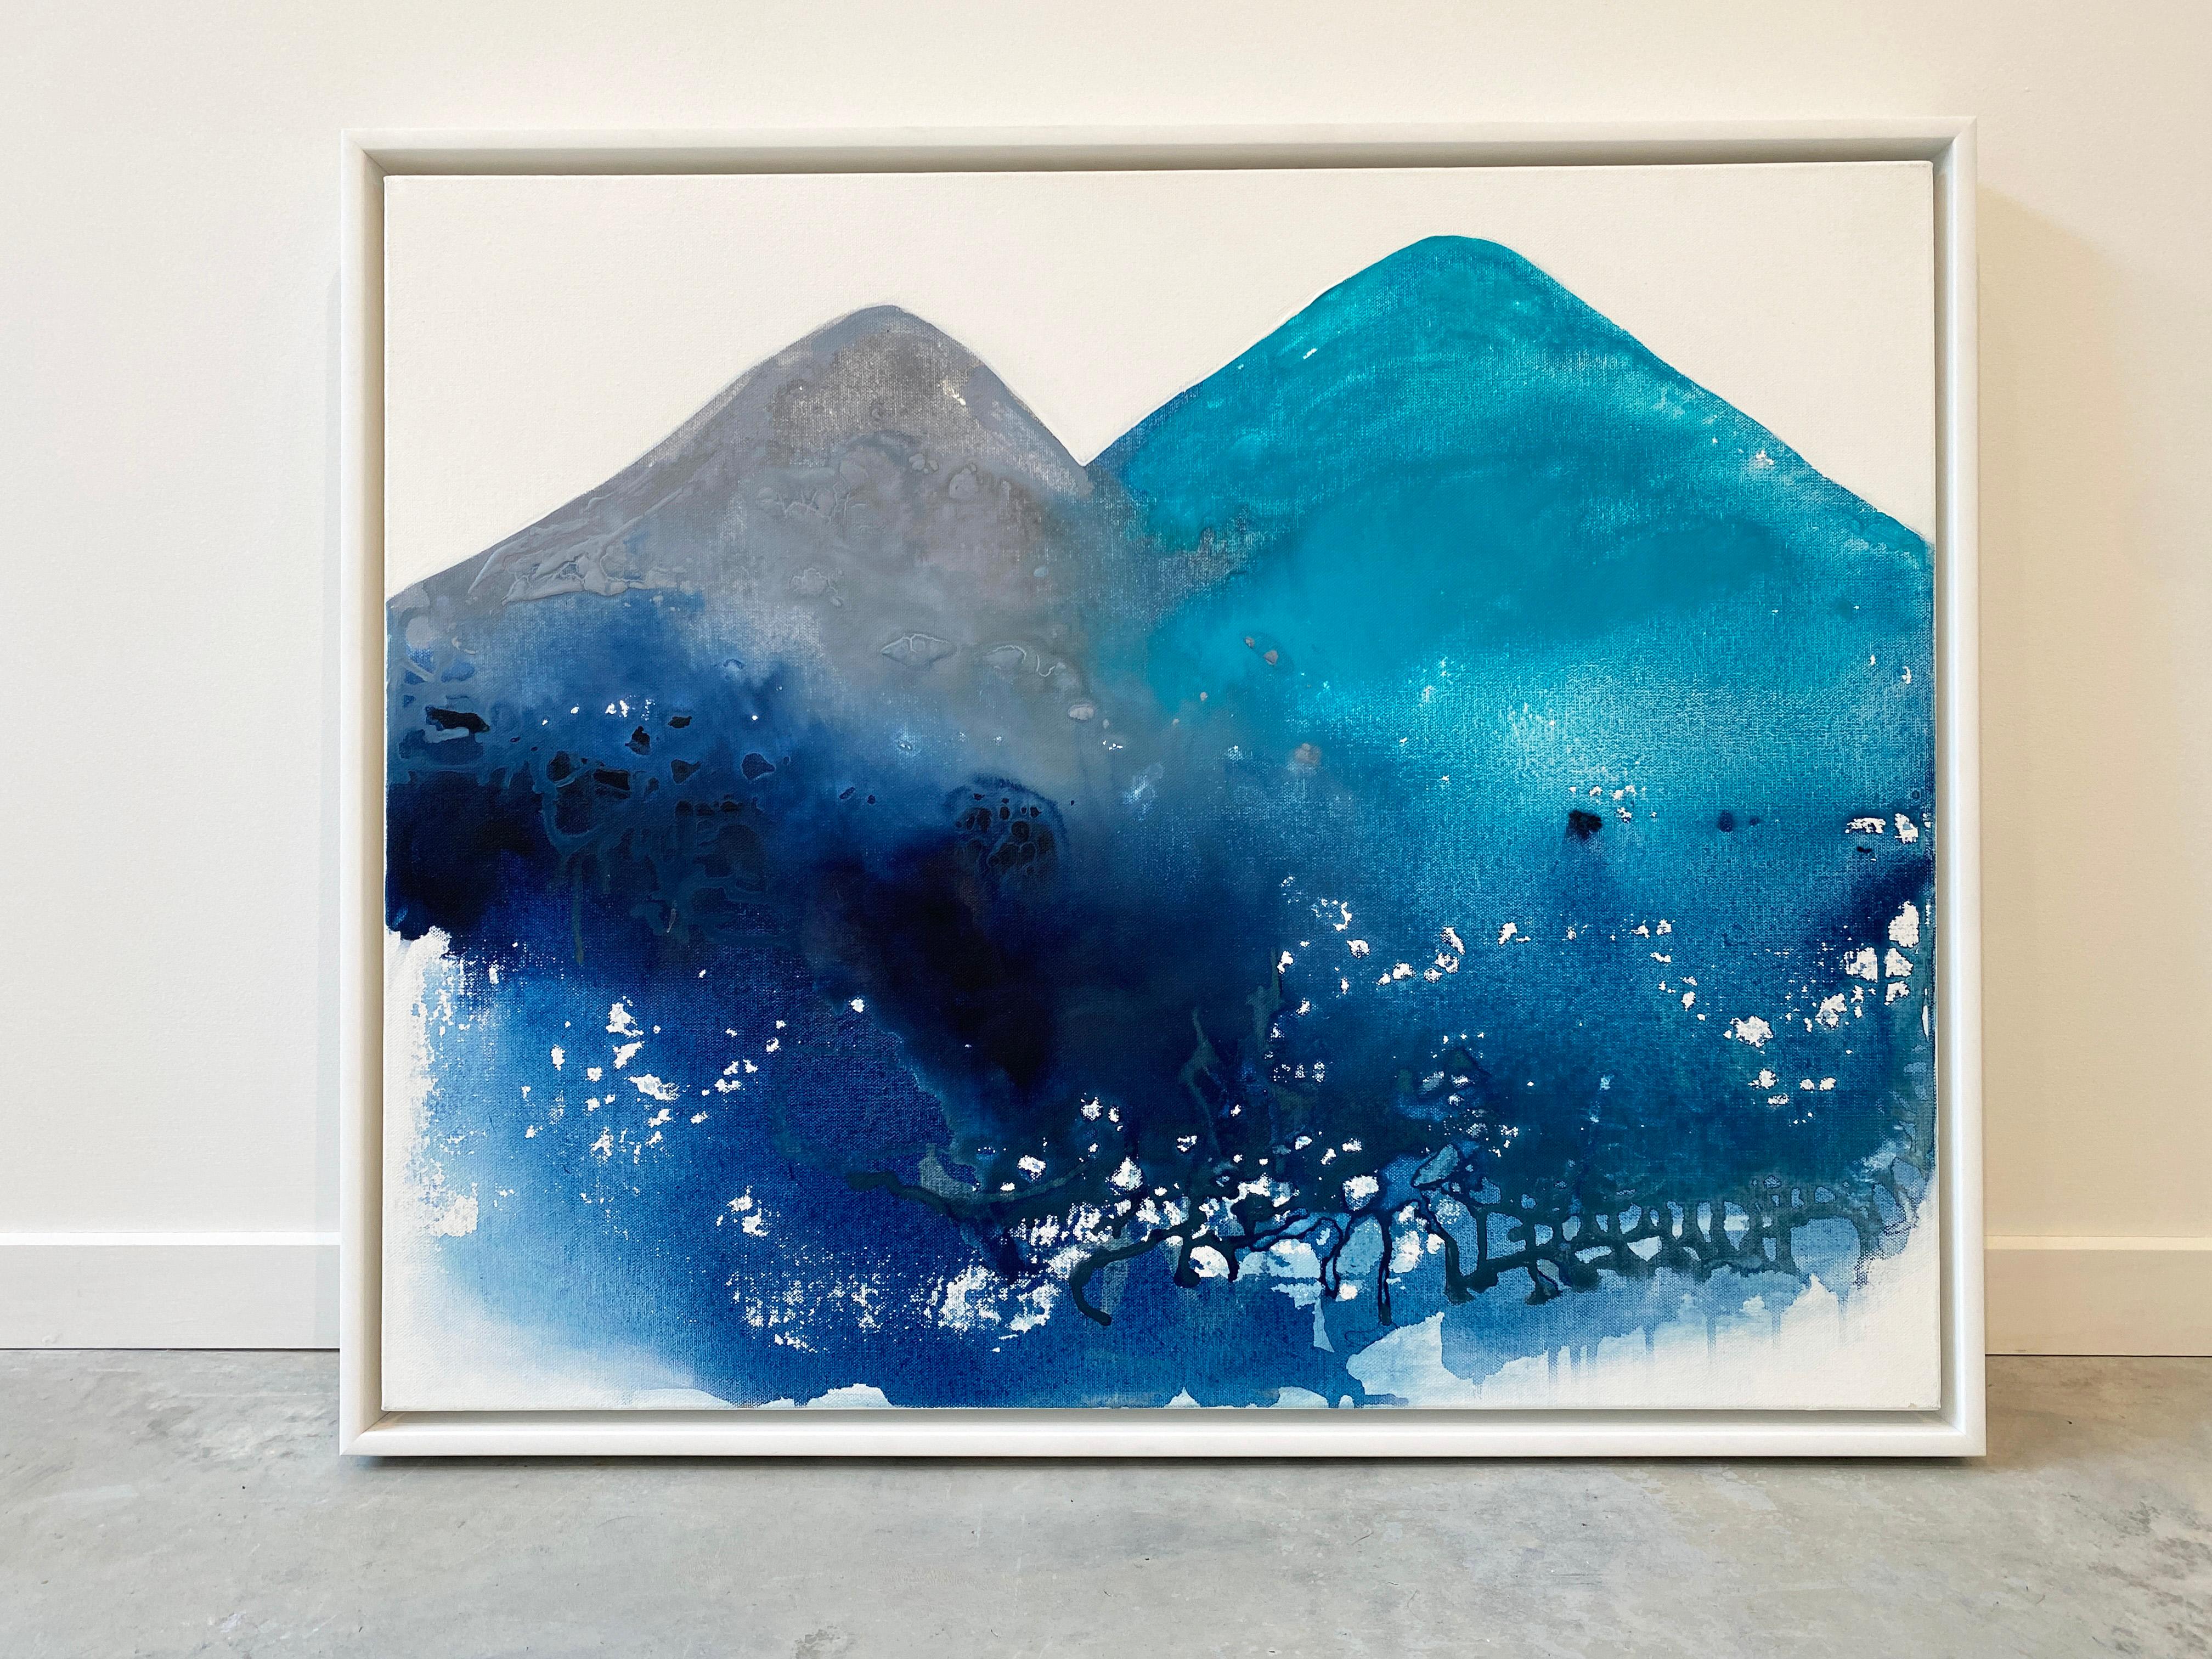 'Aqua Mountain Forms'  minimalist mountain landscape. A sweet happy original painting to add light and joy to any room. I have used colour and form to create this art work striving for a simple, comforting, delicate and vibrant feeling.

This